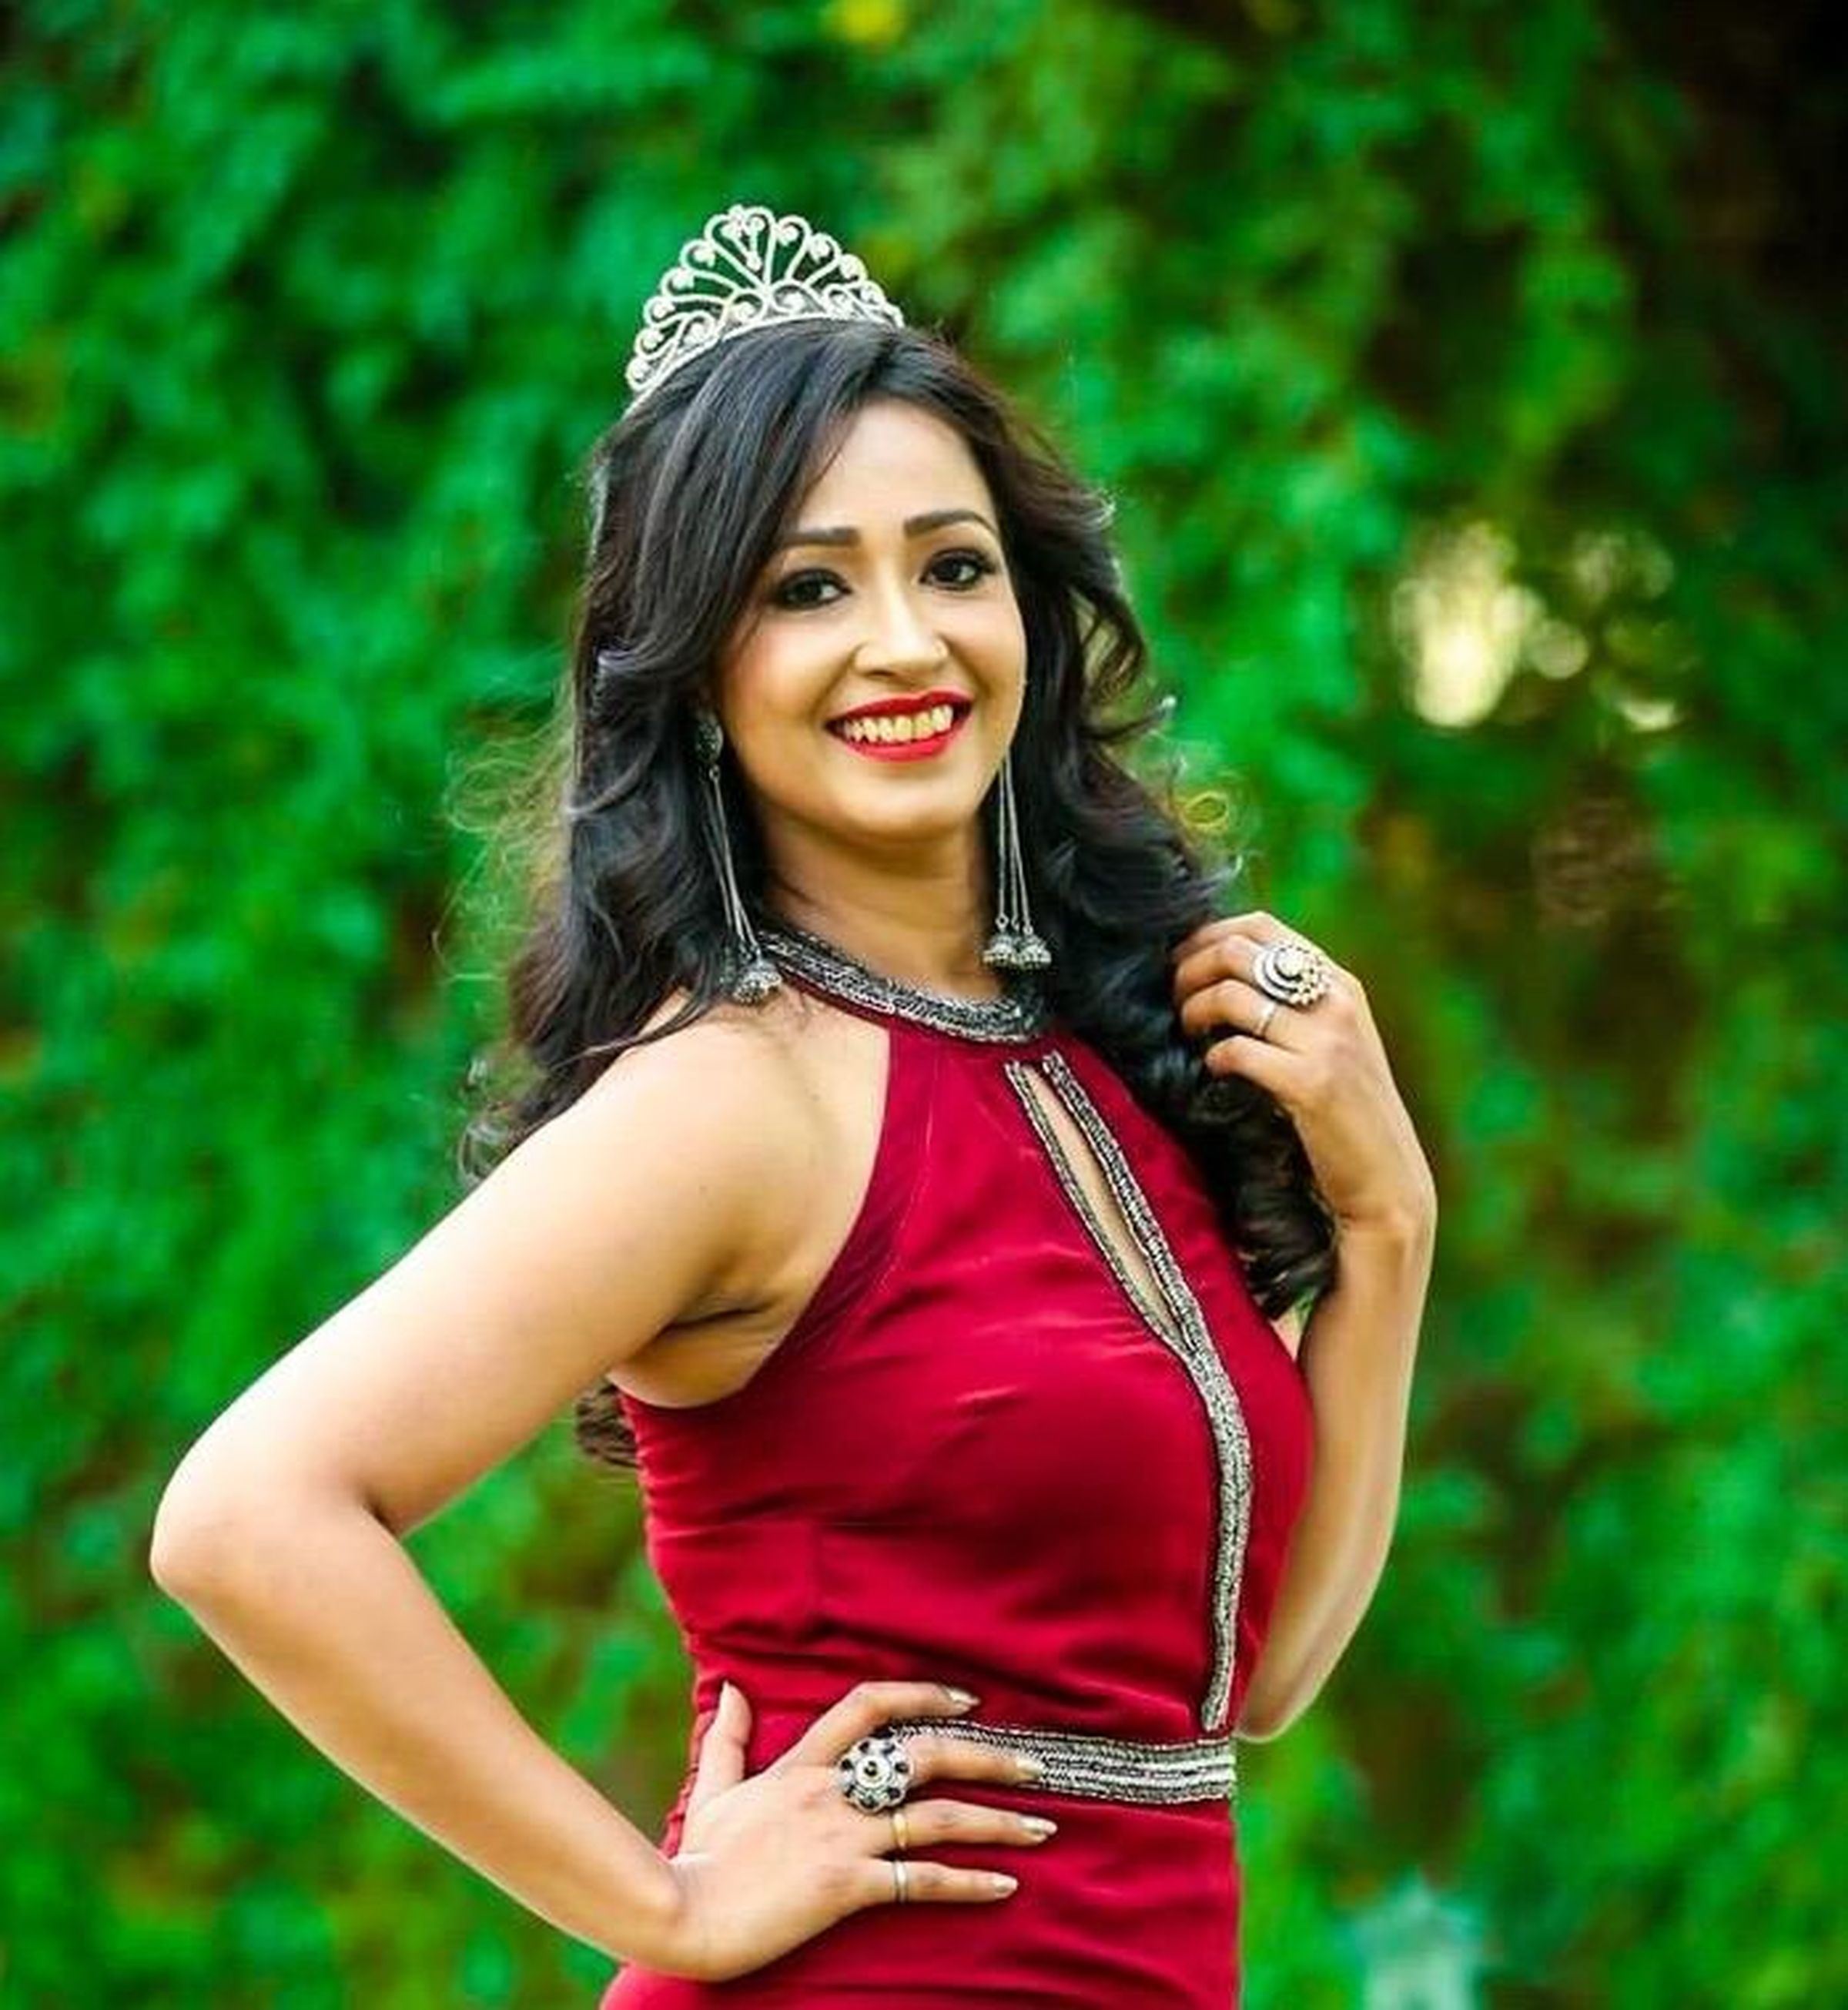 Kanchan of Jodhpur will participate in Mrs. India Universe